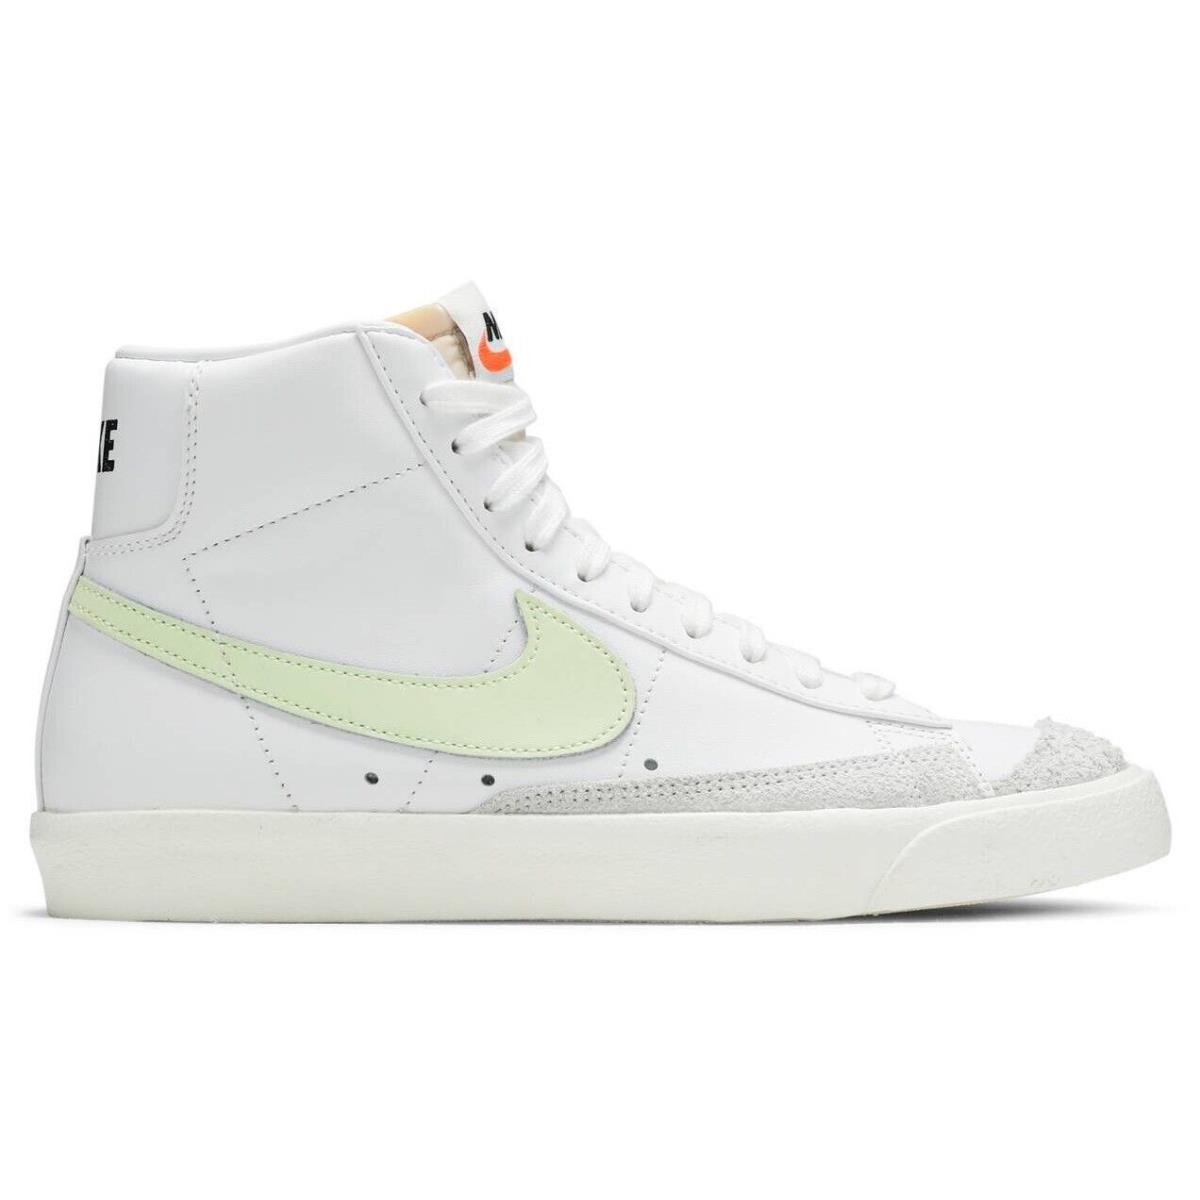 Nike Blazer Mid `77 Womens CZ1055-108 White Barely Volt Shoes Sneakers Size 11 - White/Barely Volt